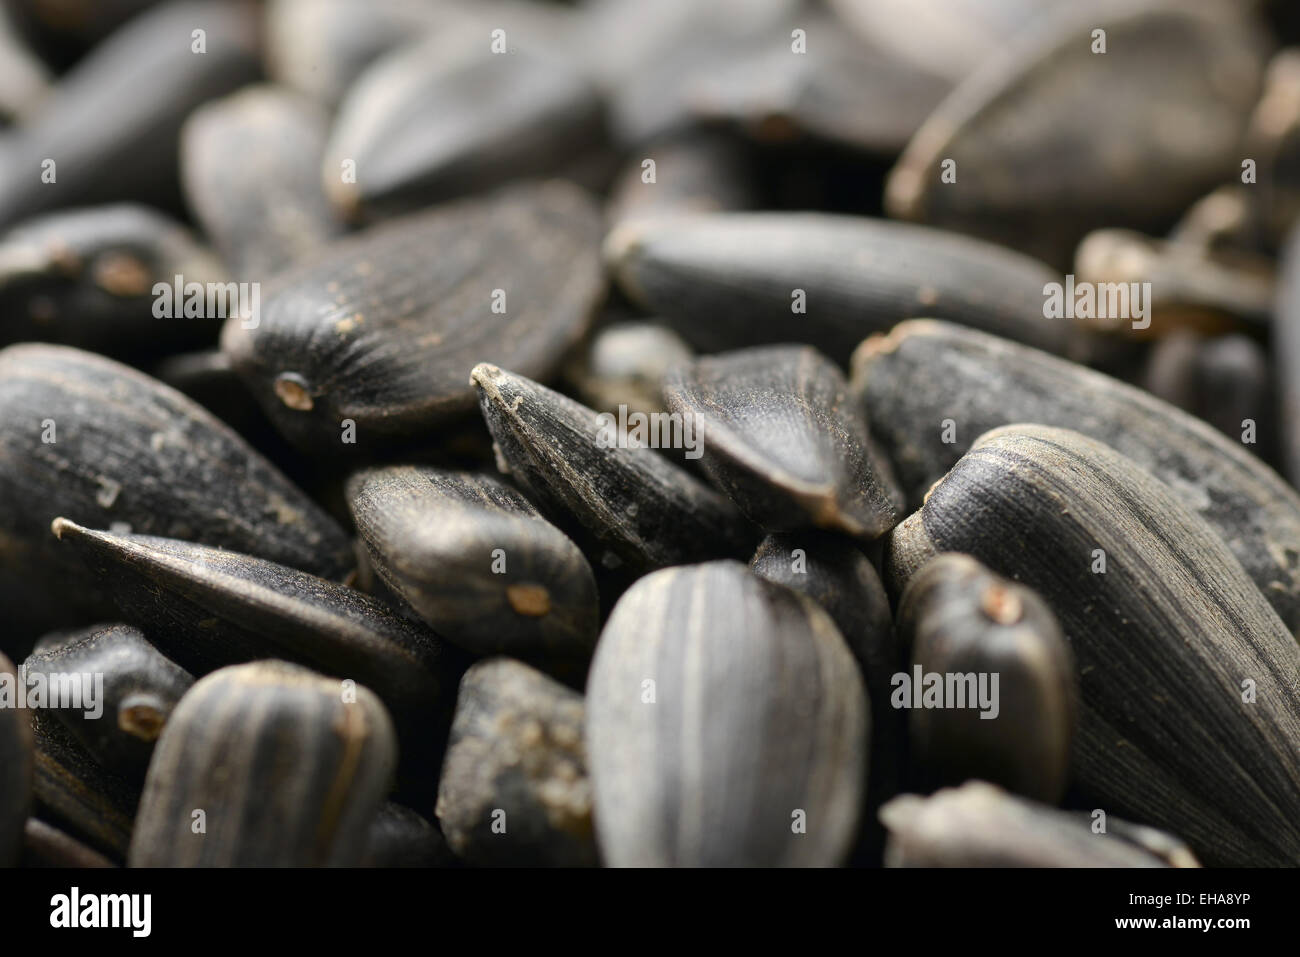 Sunflower seeds, for backgrounds or textures. Stock Photo